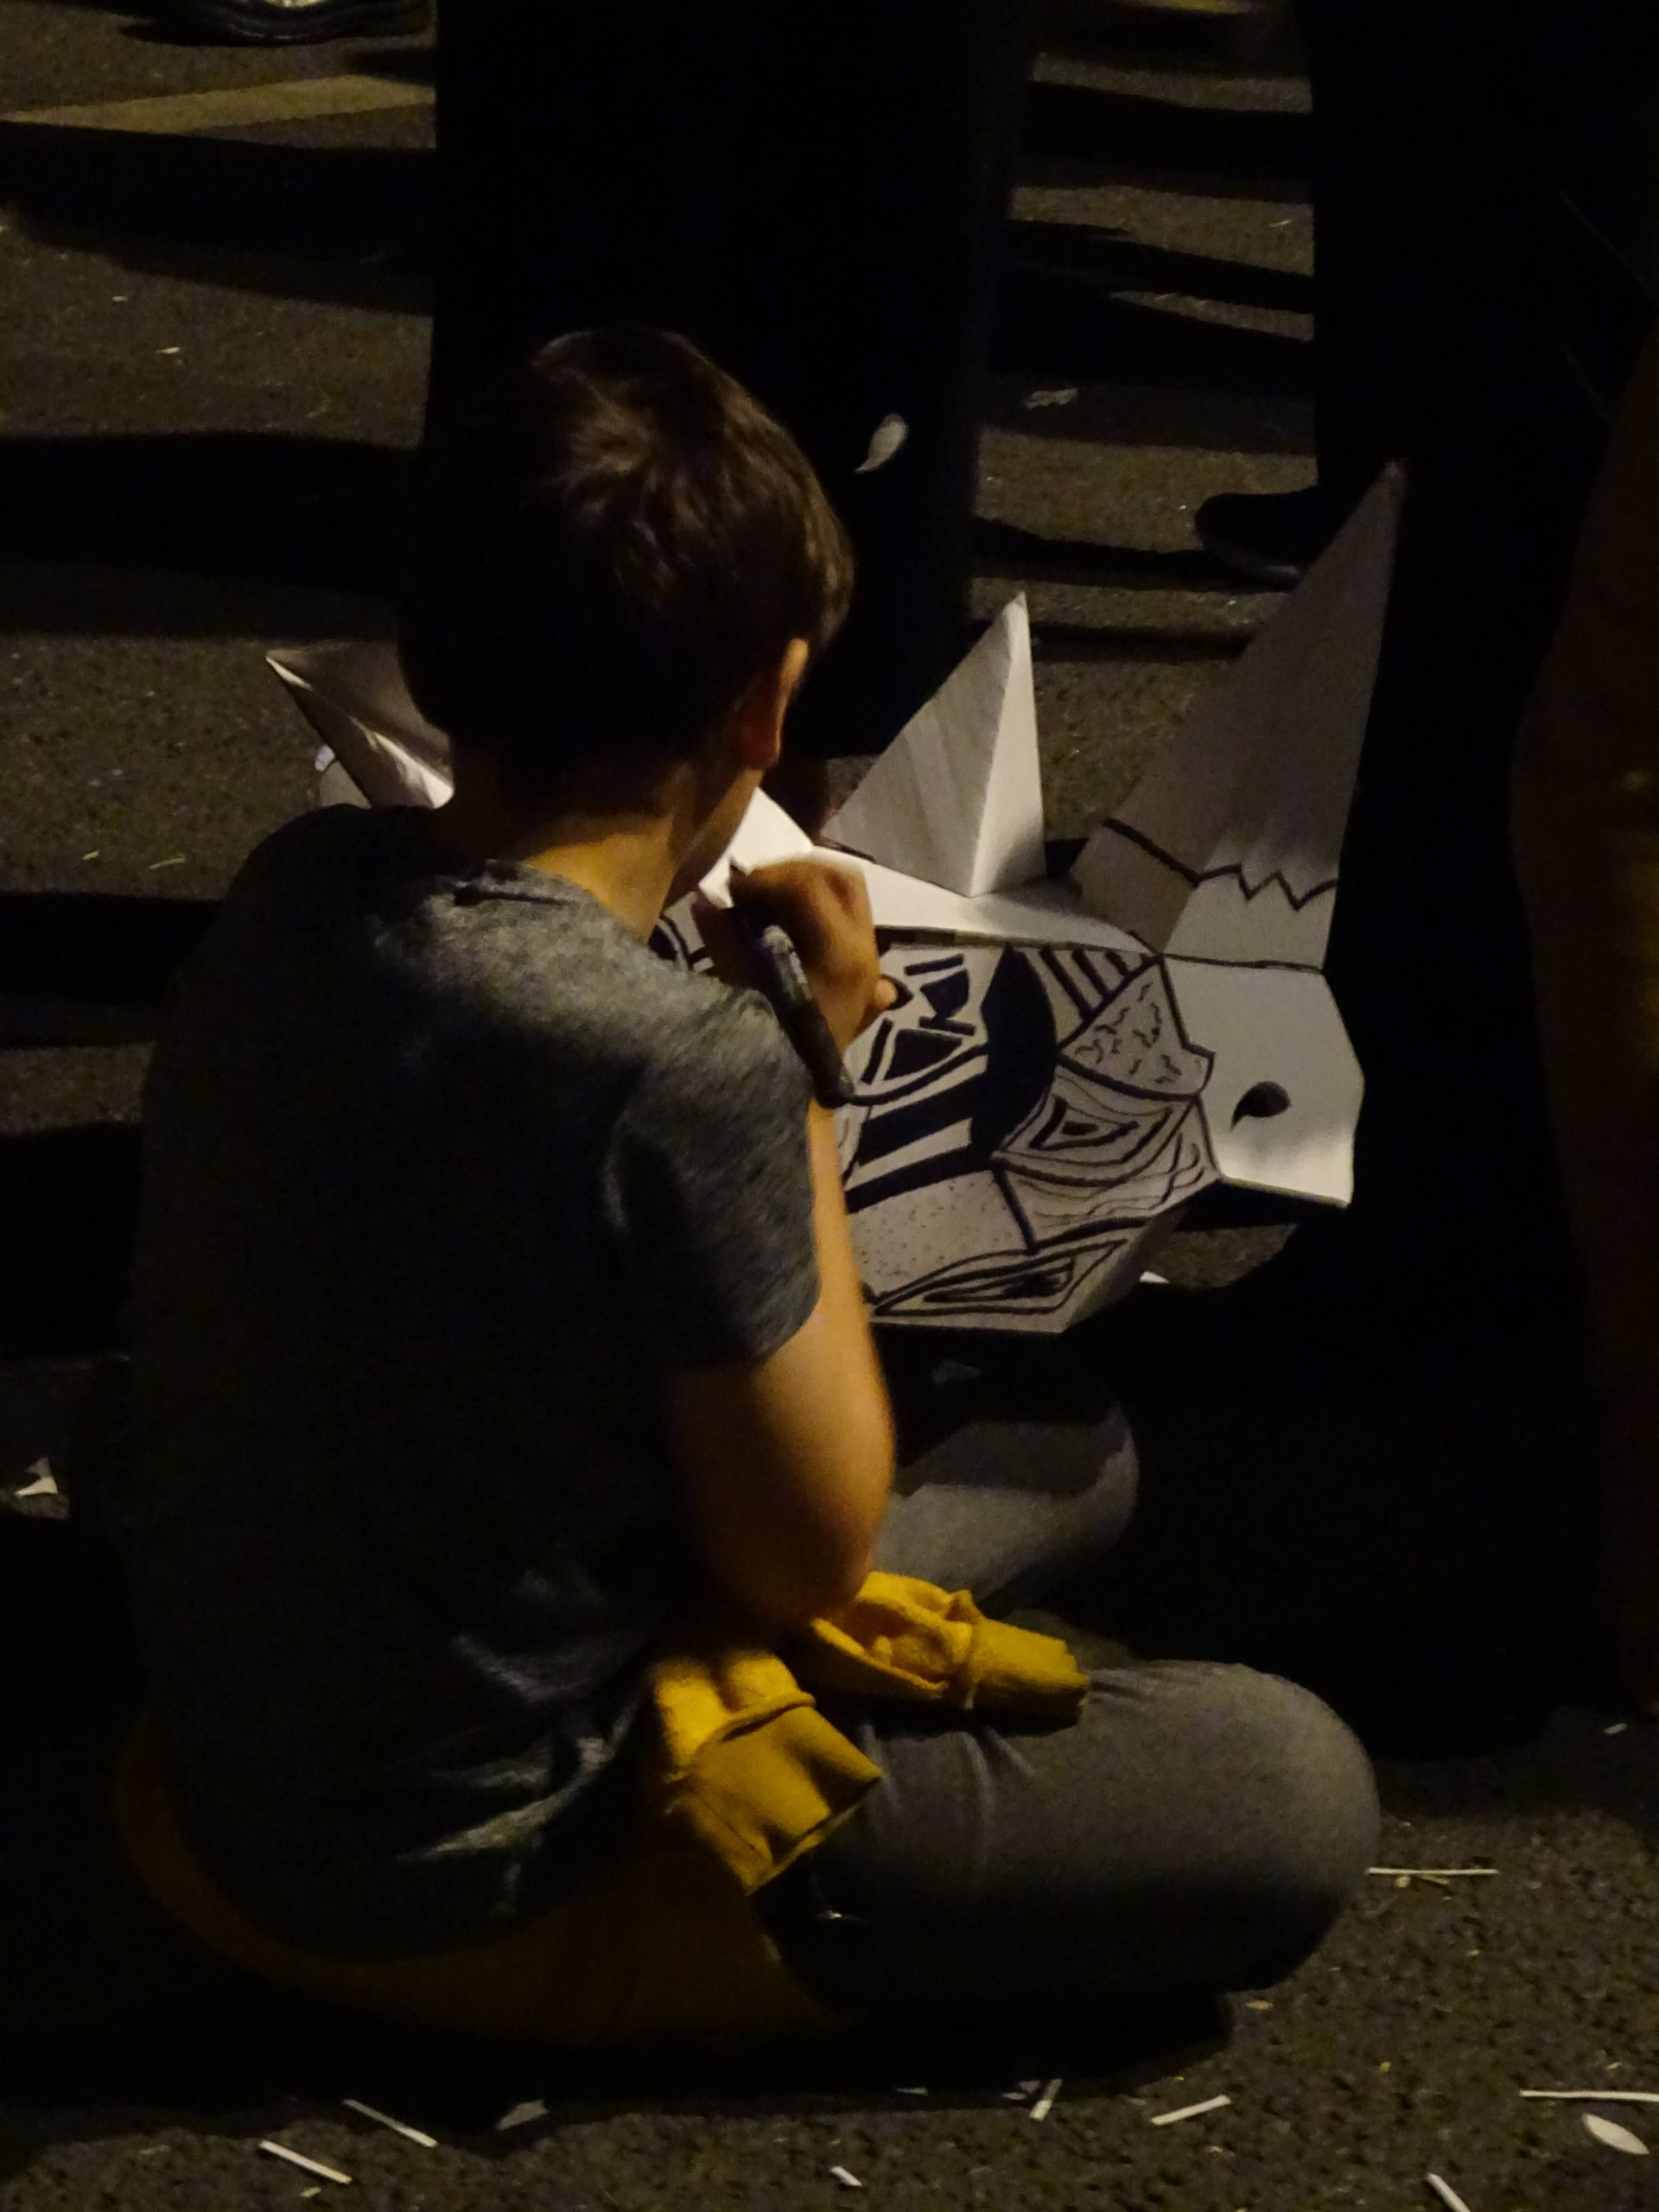 A person sits on the ground, decorating a rhino mask with black pen. It's night.